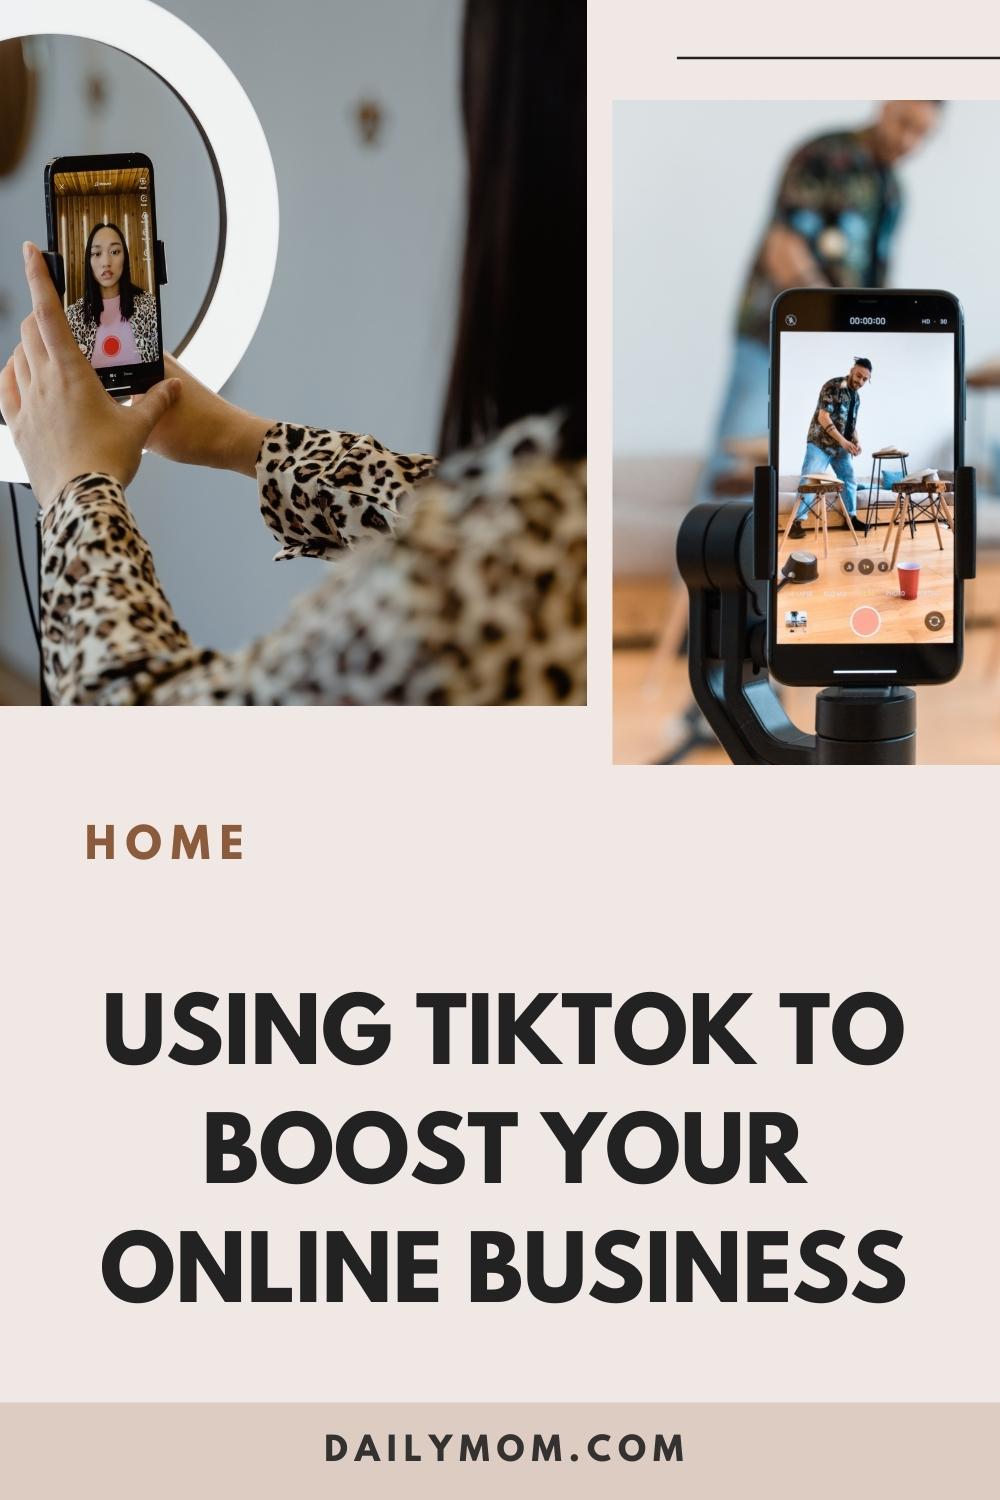 8 Exciting And Easy Ways You Can Use Videos To Boost Your Tiktok Business